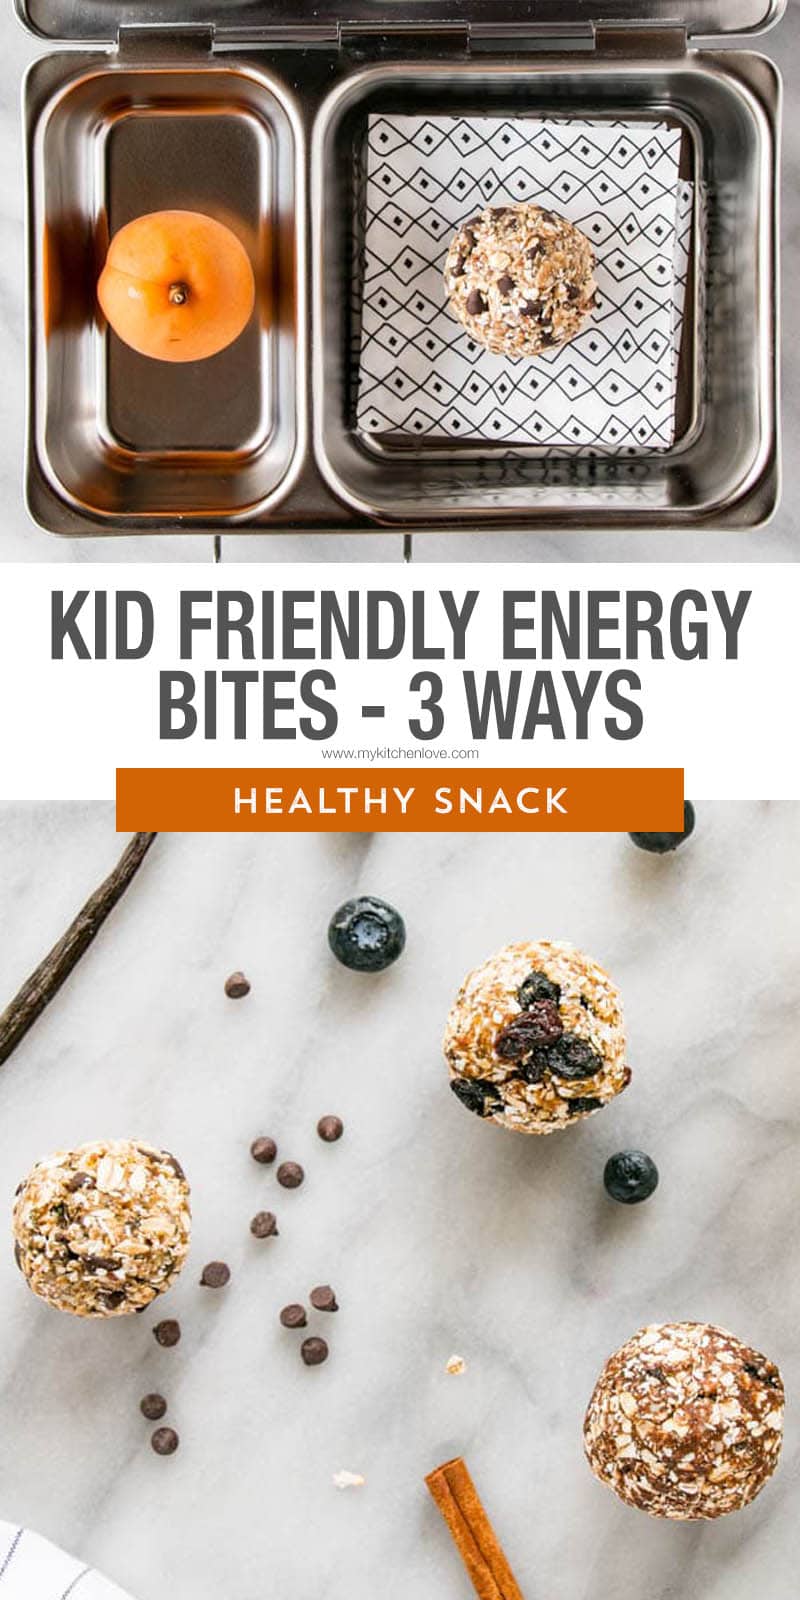 Snacks for School! 5 new and fresh ideas for nut-free and healthy options for kids! Kid-Friendly Oat Bites are perfect for Back-to-School and are freezer friendly meaning they can go the distance. These healthy snacks for kids aren't to be missed! via @mykitchenlove